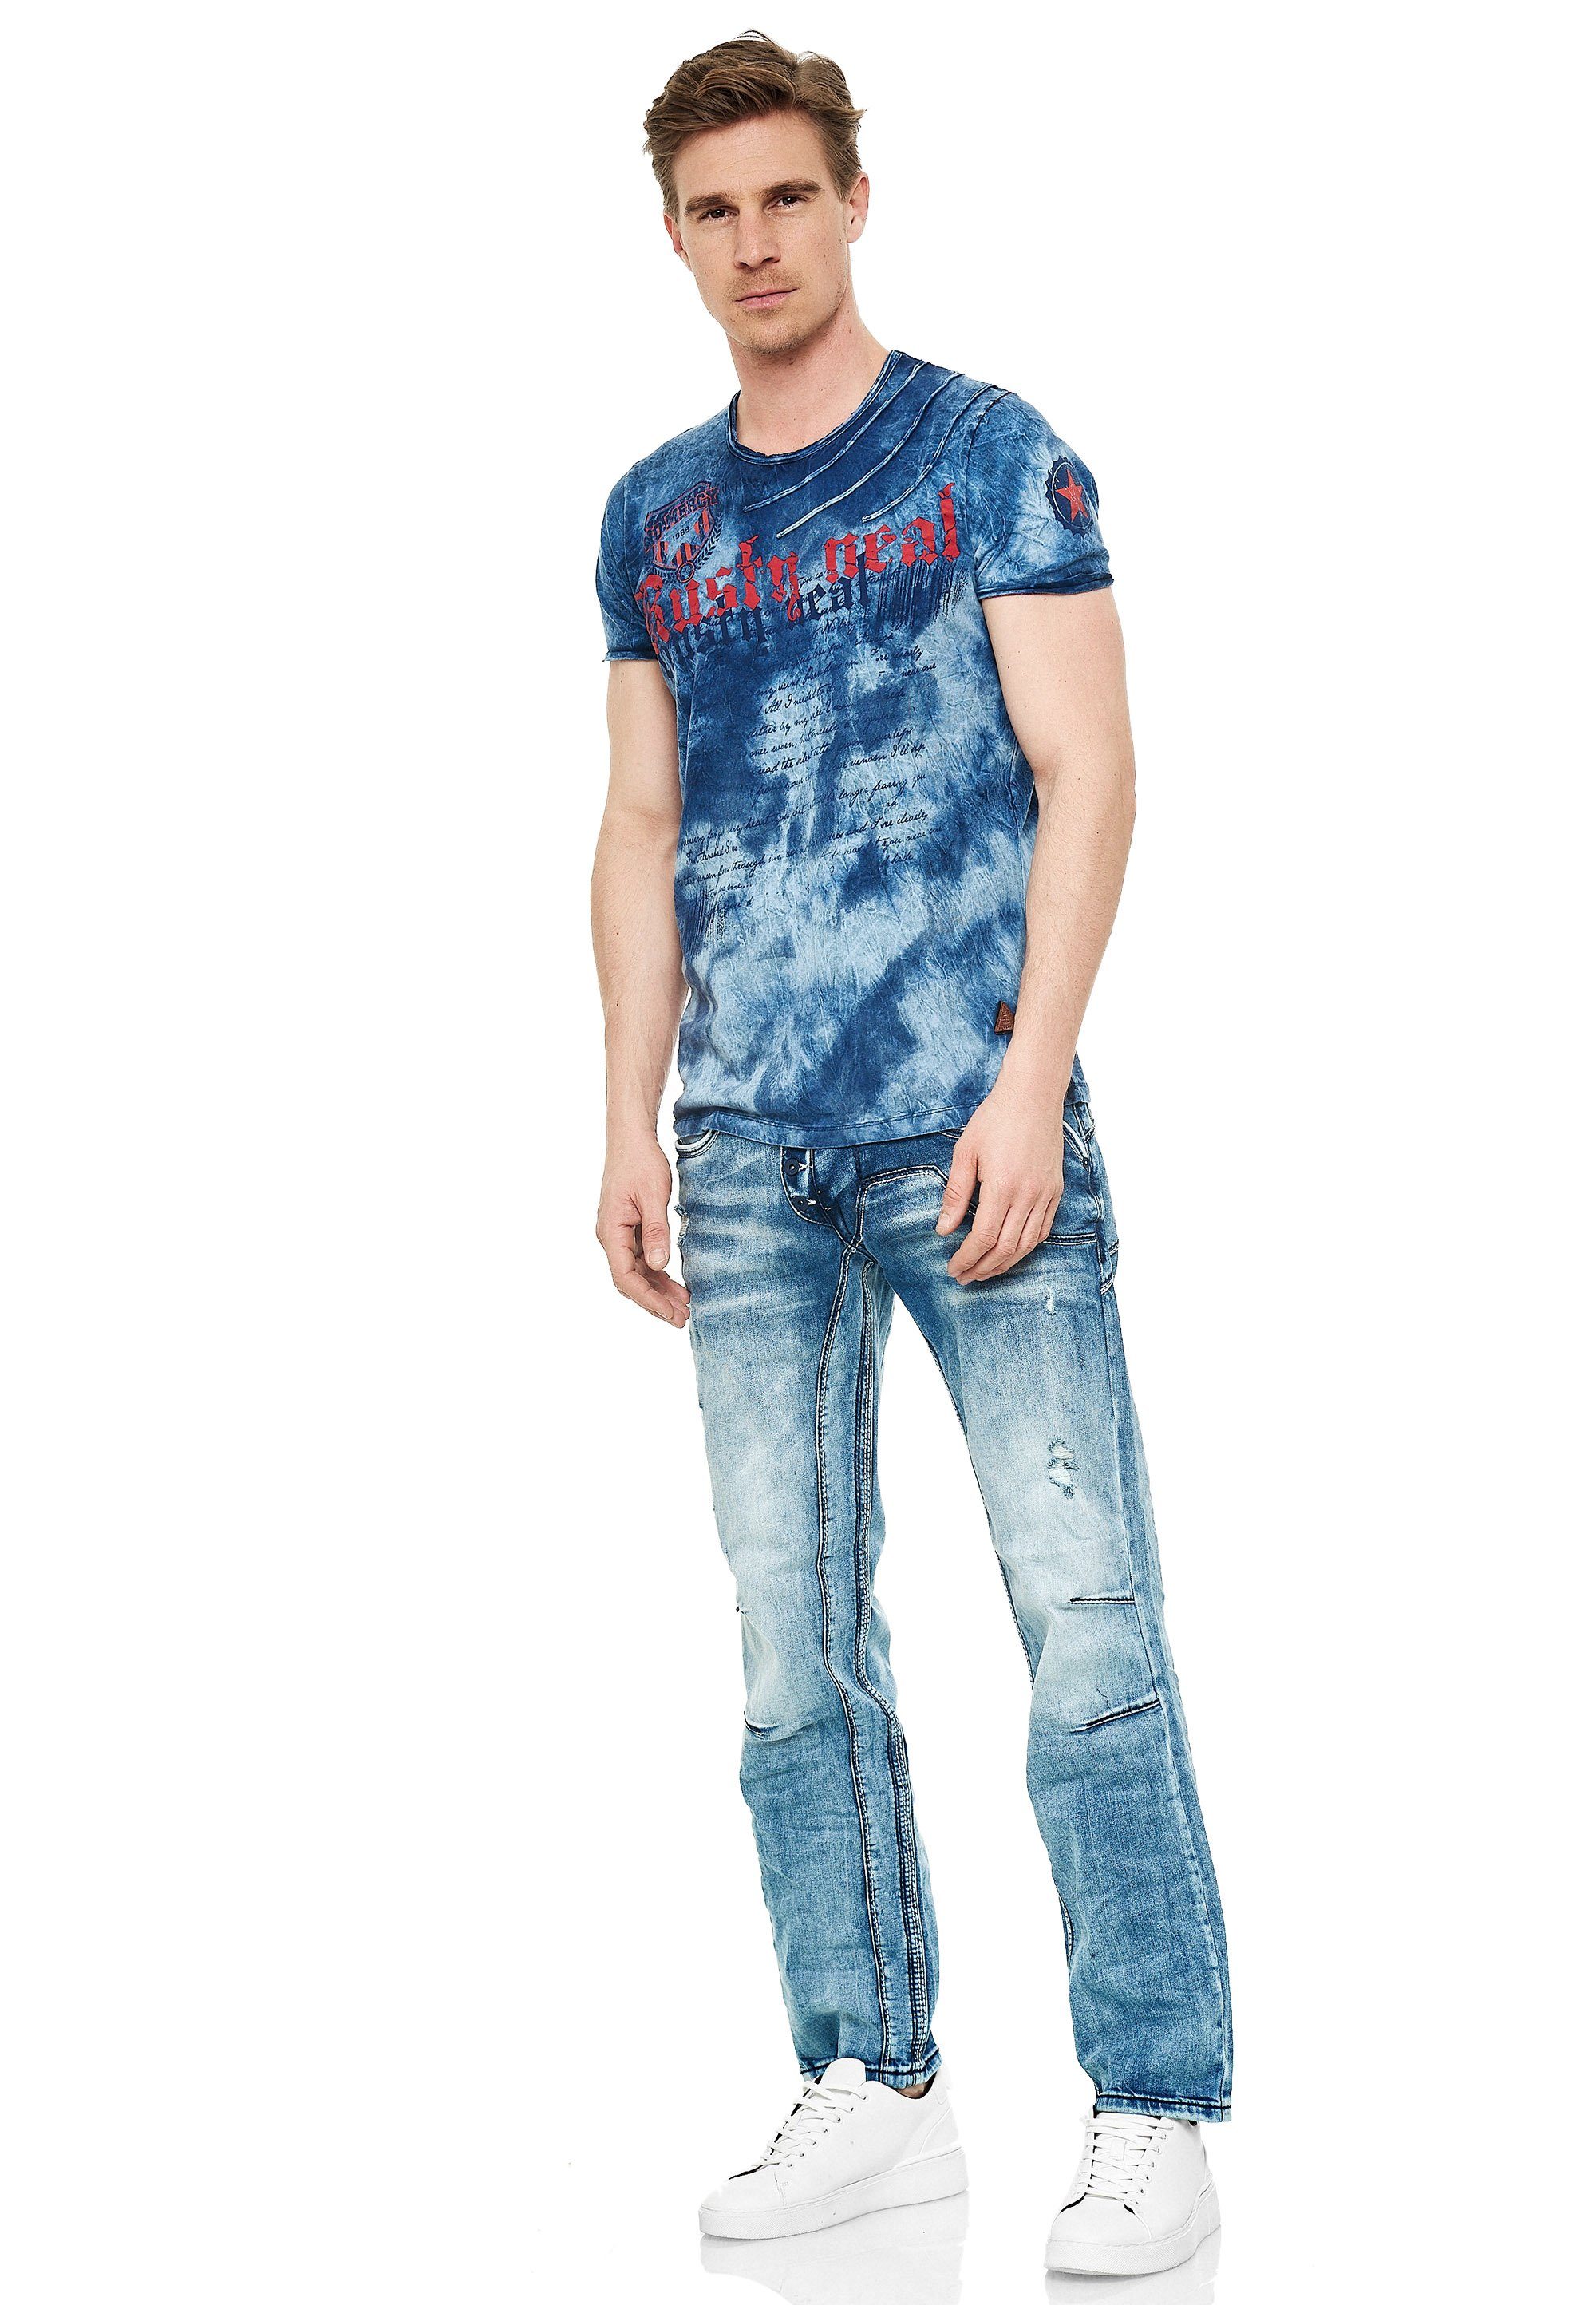 Rusty Neal Bequeme Jeans mit Waschung cooler